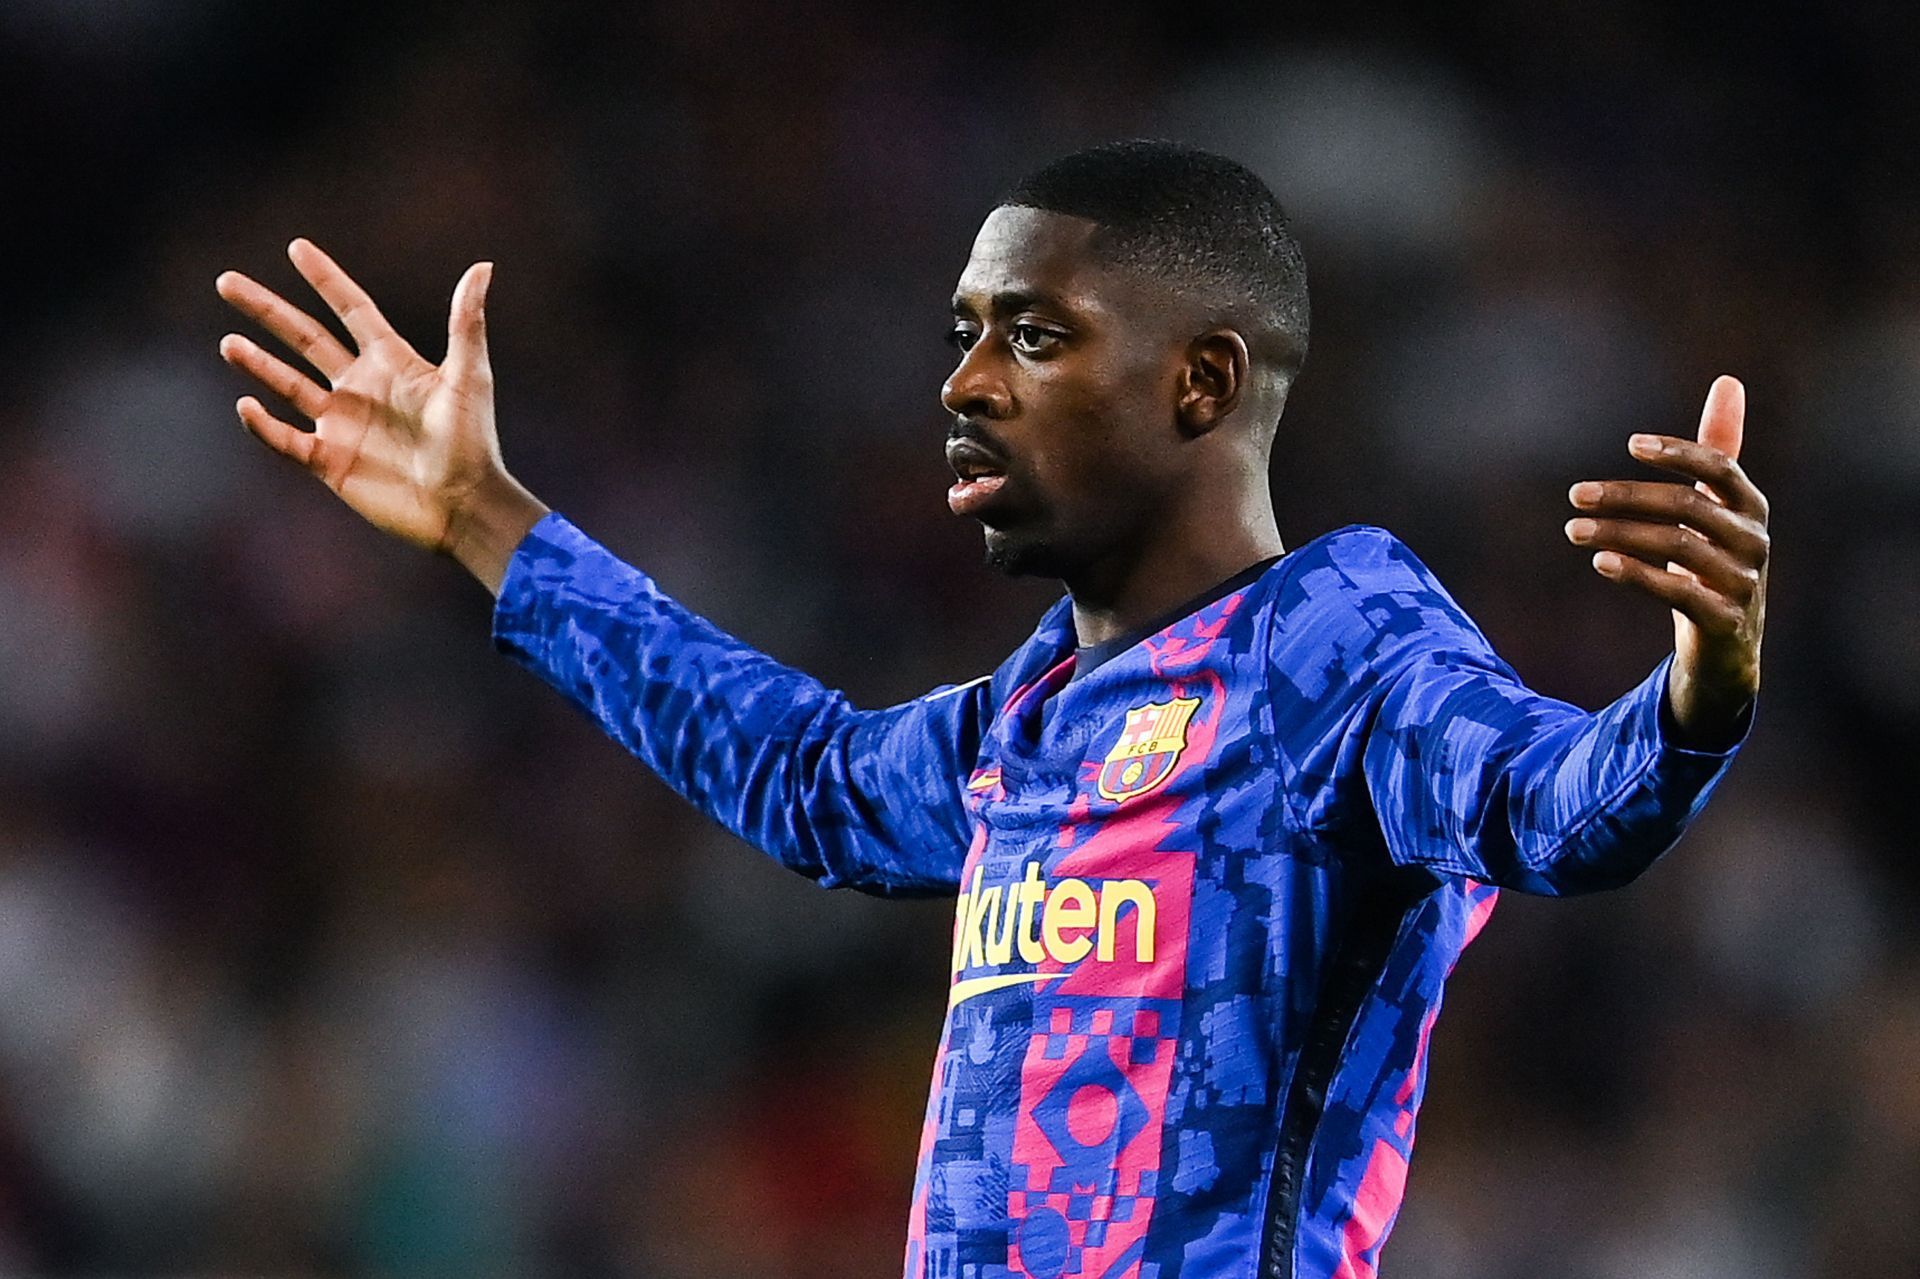 Dembele has 11 assists for Barcelona this season